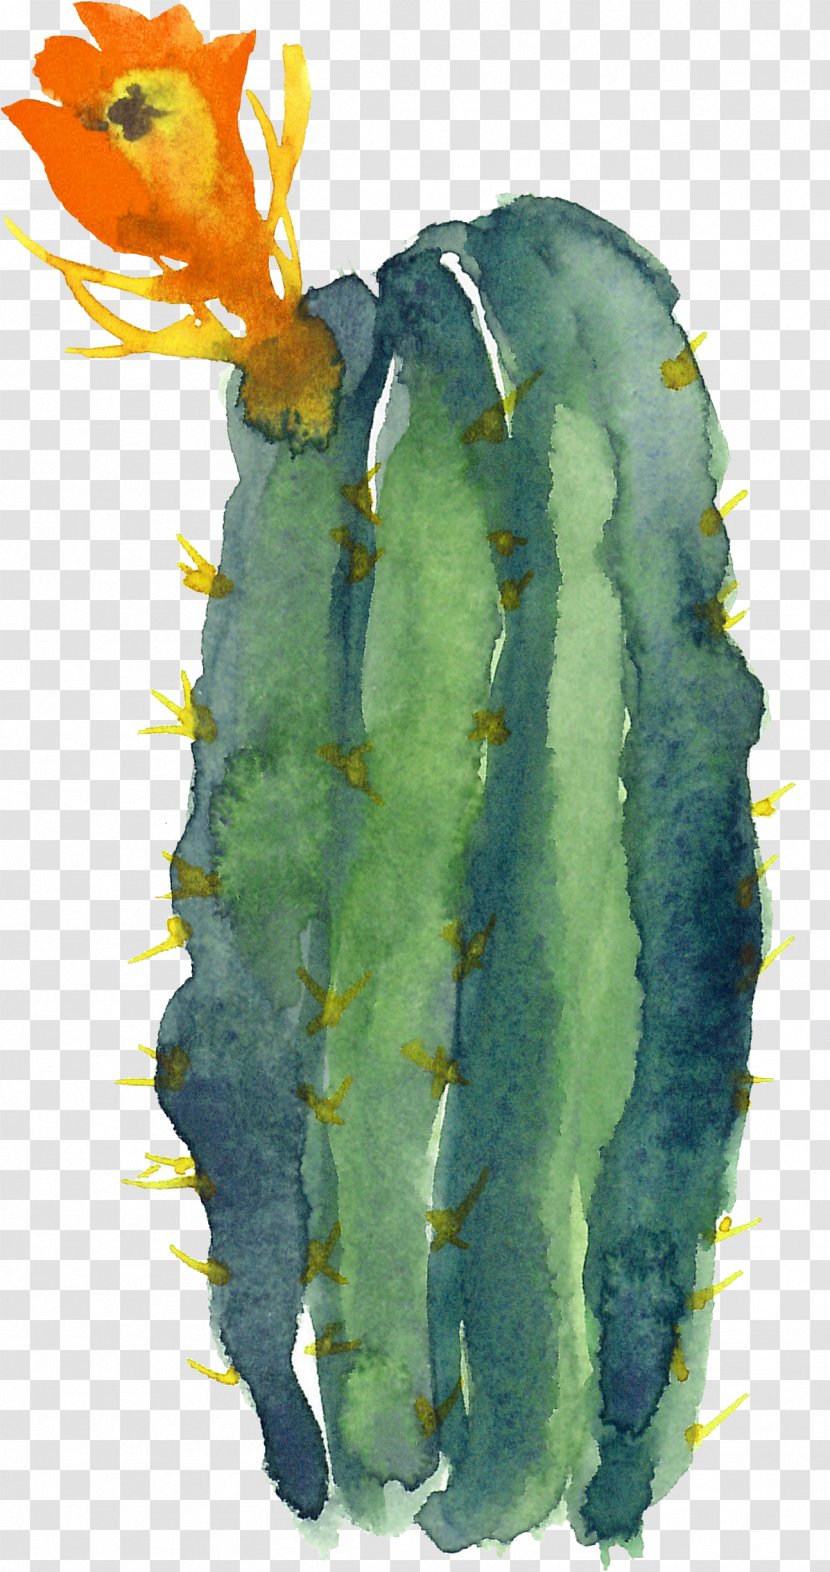 Cactaceae Modern Watercolor: A Playful And Contemporary Exploration Of Watercolor Painting - Cactus Transparent PNG